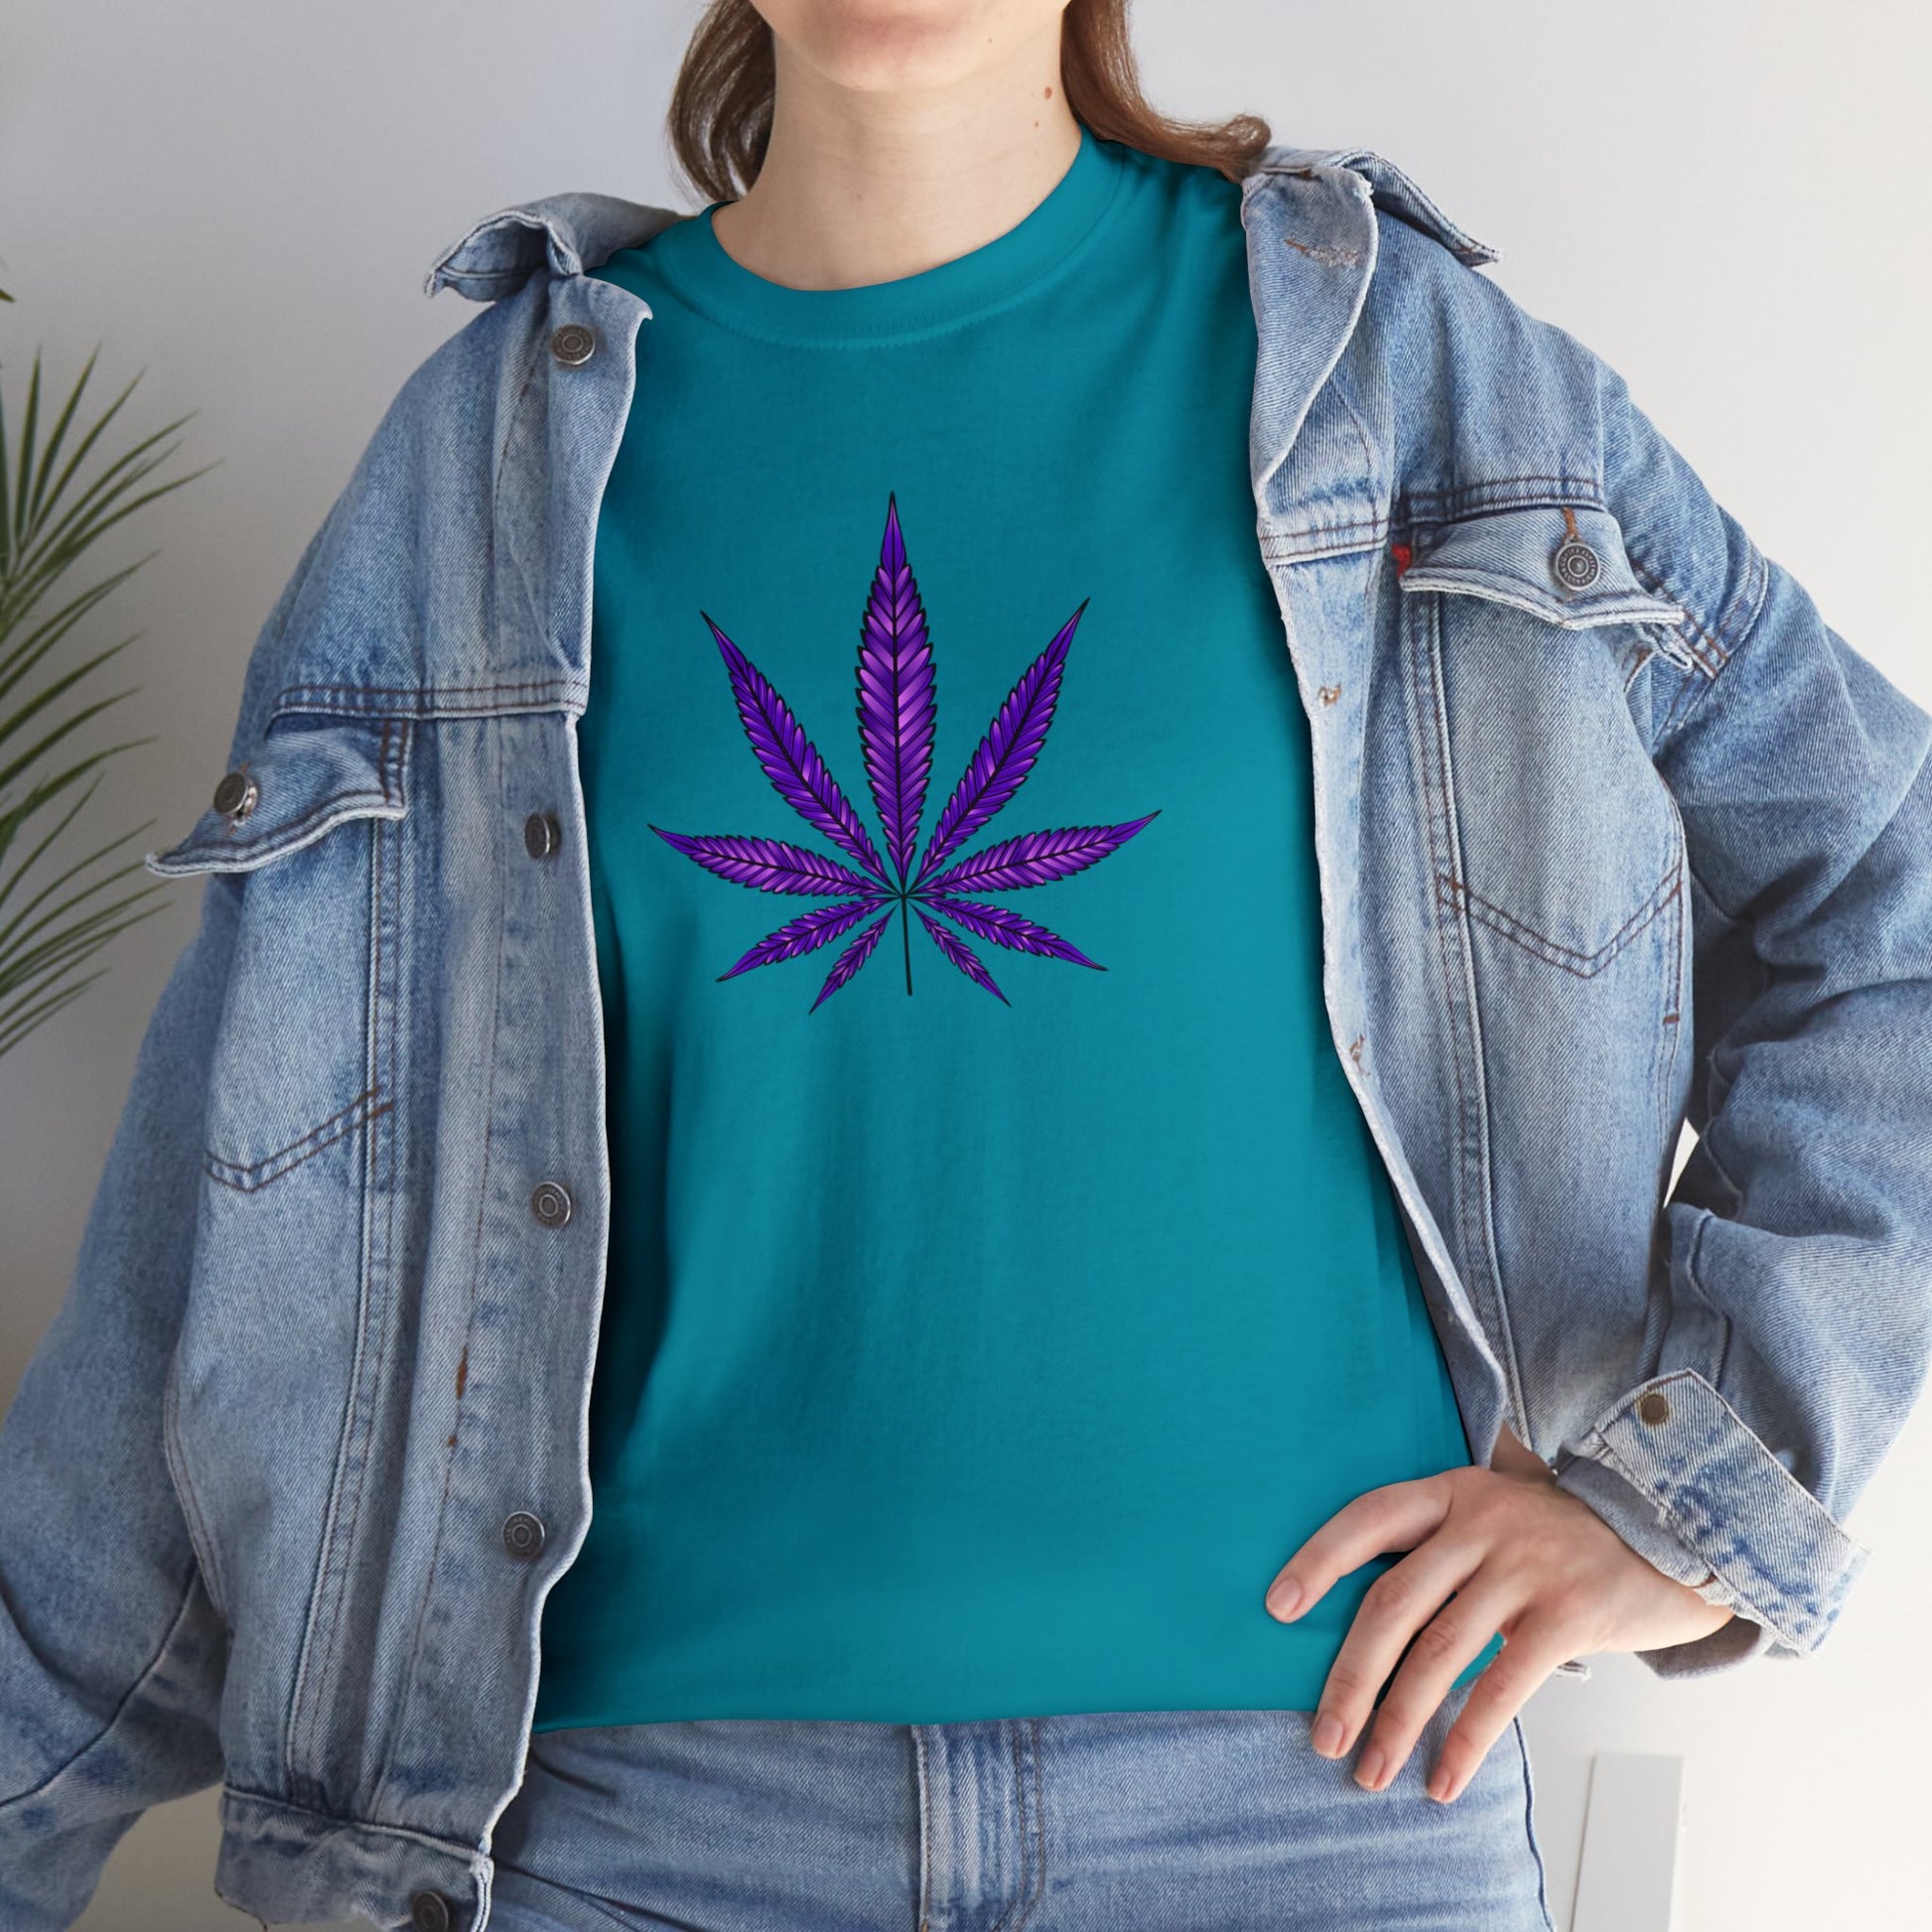 A person wearing a vibrant color, Purple Cannabis Leaf Tee, partially covered by an unbuttoned blue denim jacket, reflecting marijuana culture.